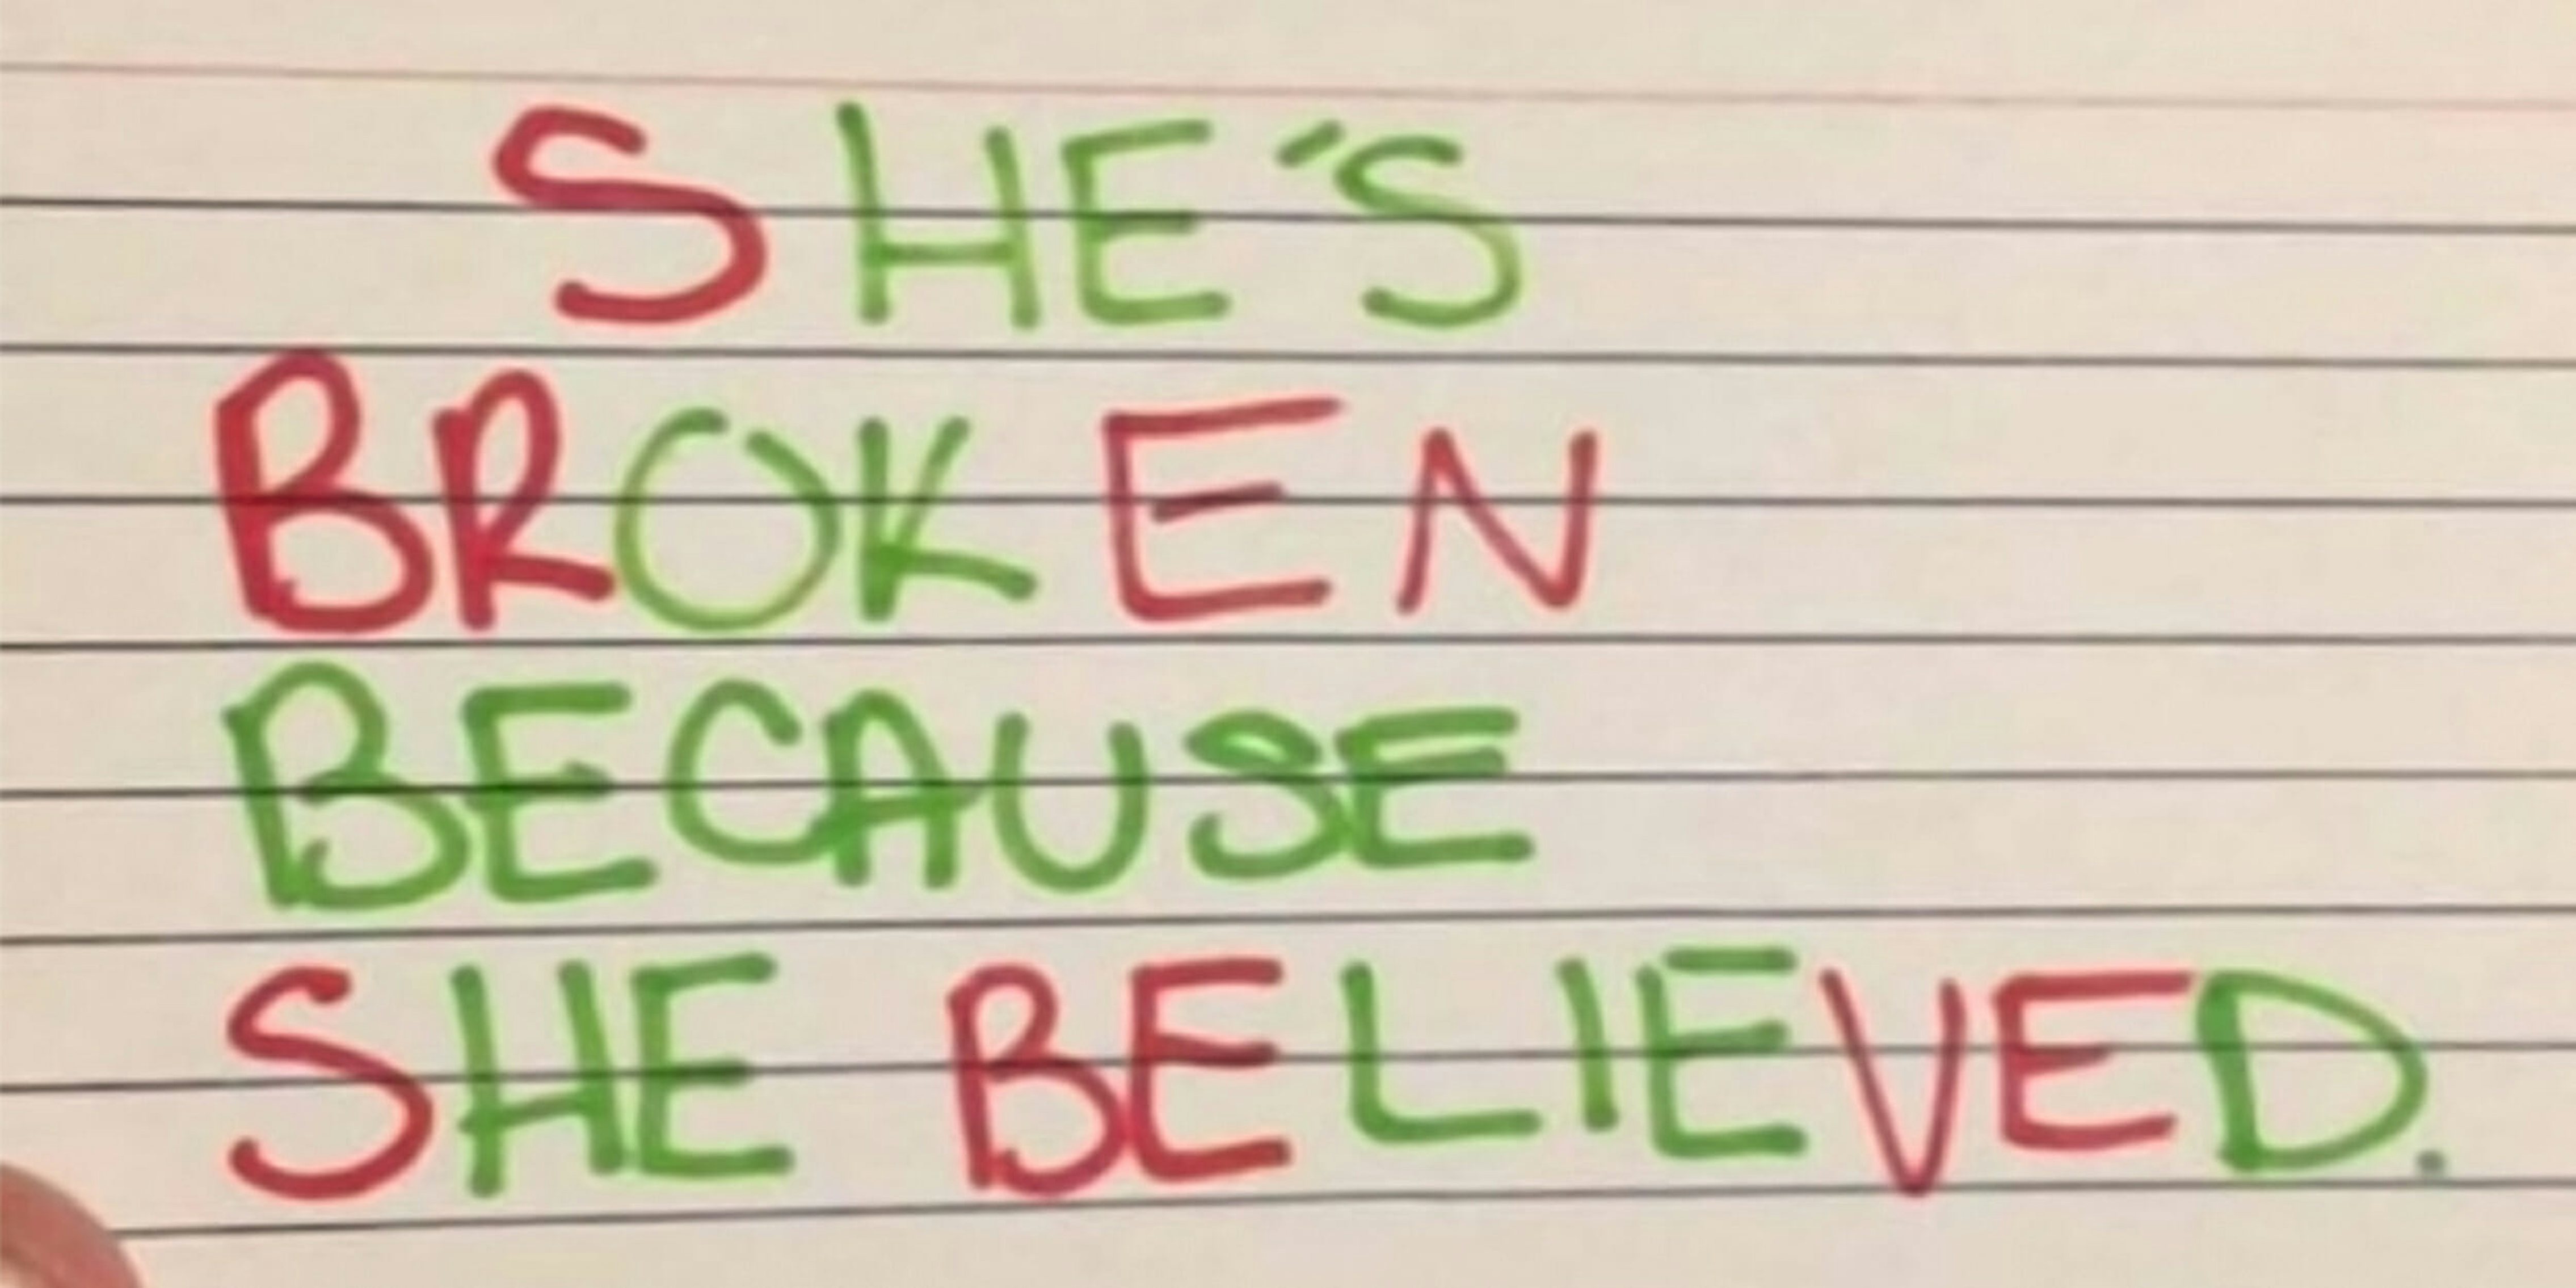 She's broken because she believed, he's ok because he lied